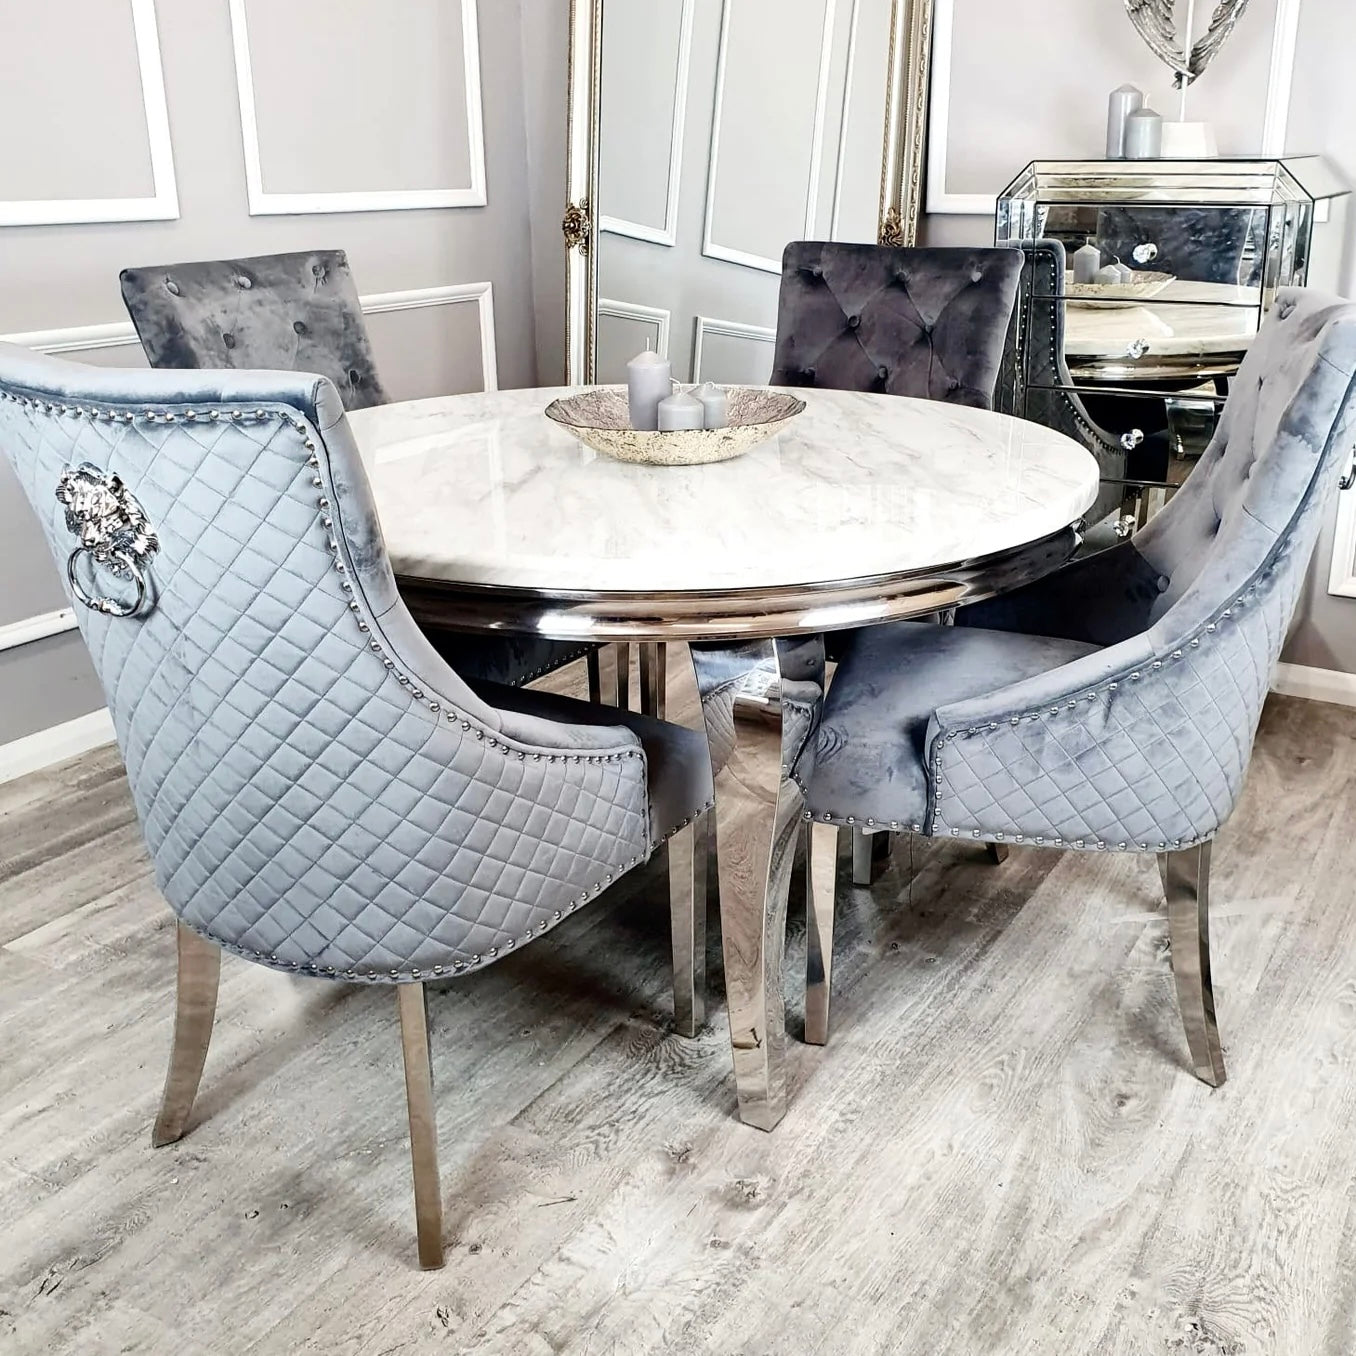 Louis 130cm marble dining table with Mayfair lion knocker chairs